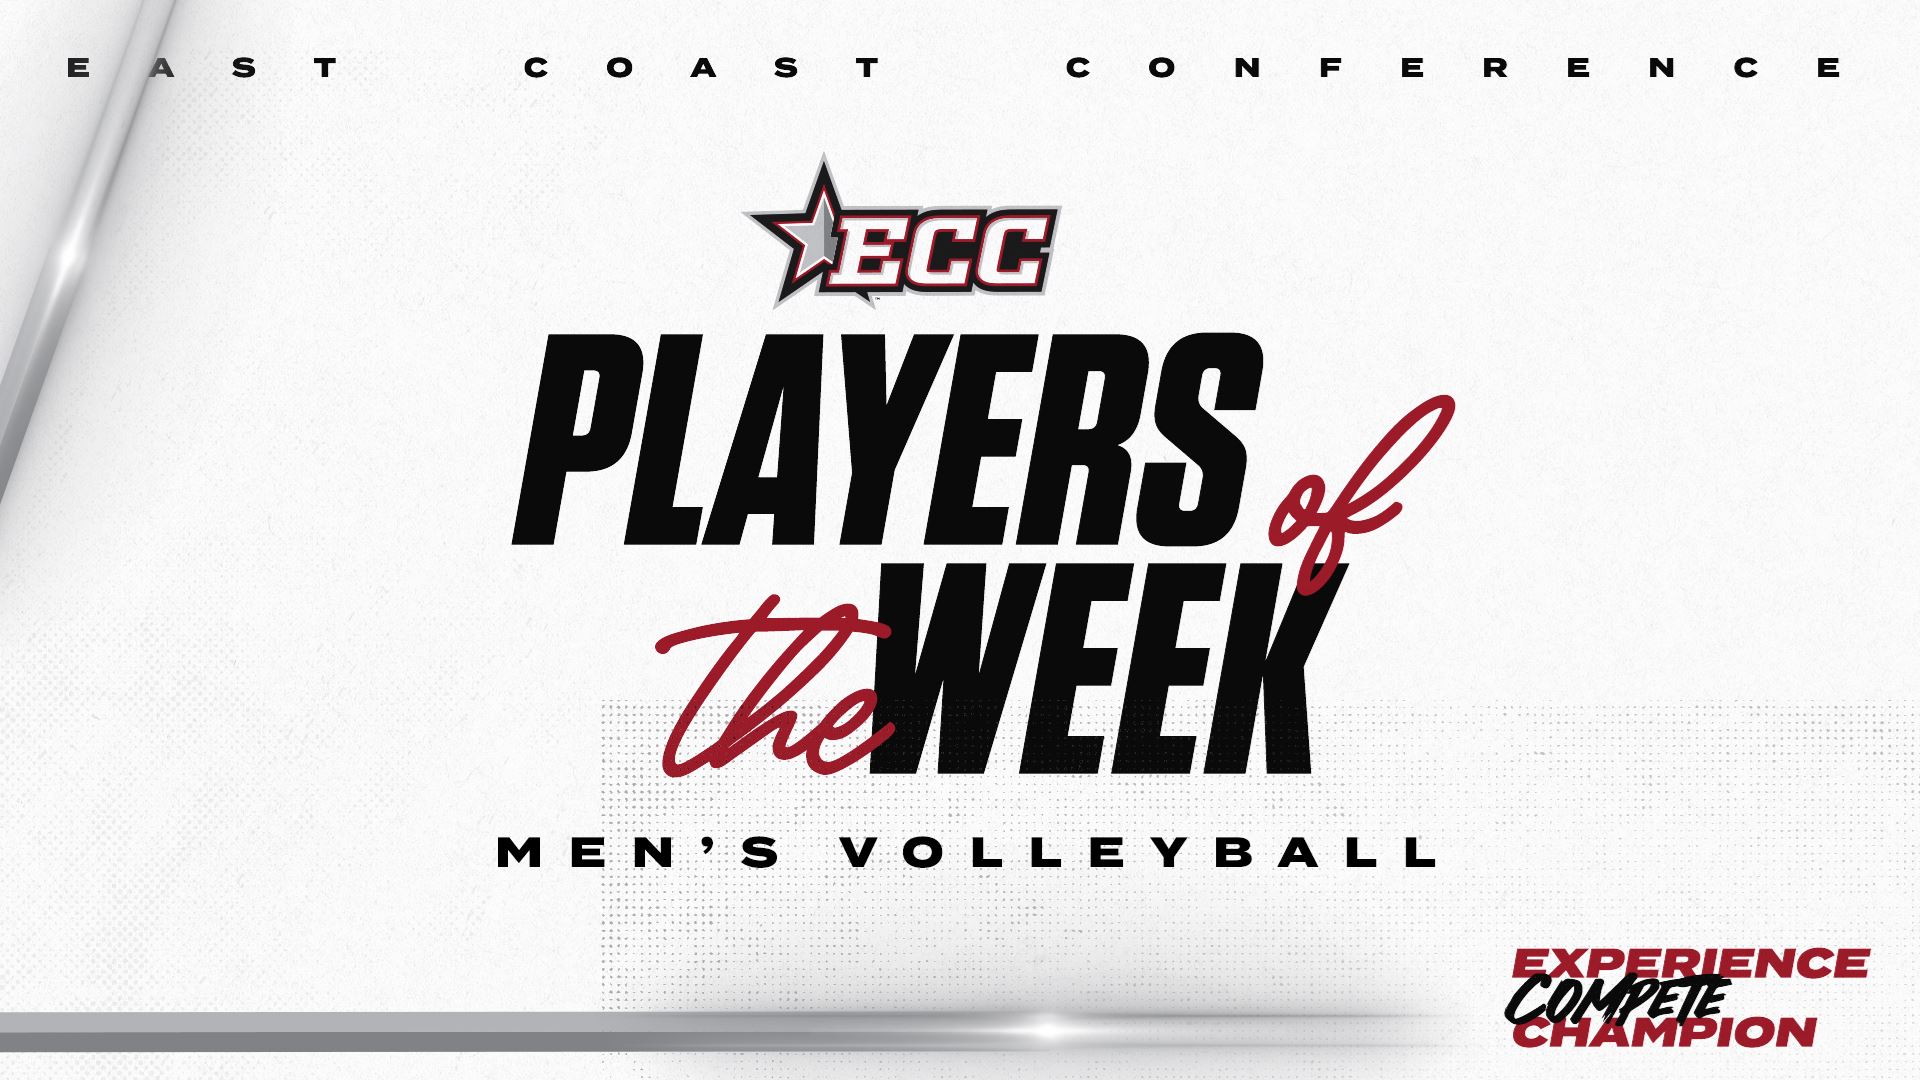 WILEY AND KOSTER EARN ECC WEEKLY ACCOLADES